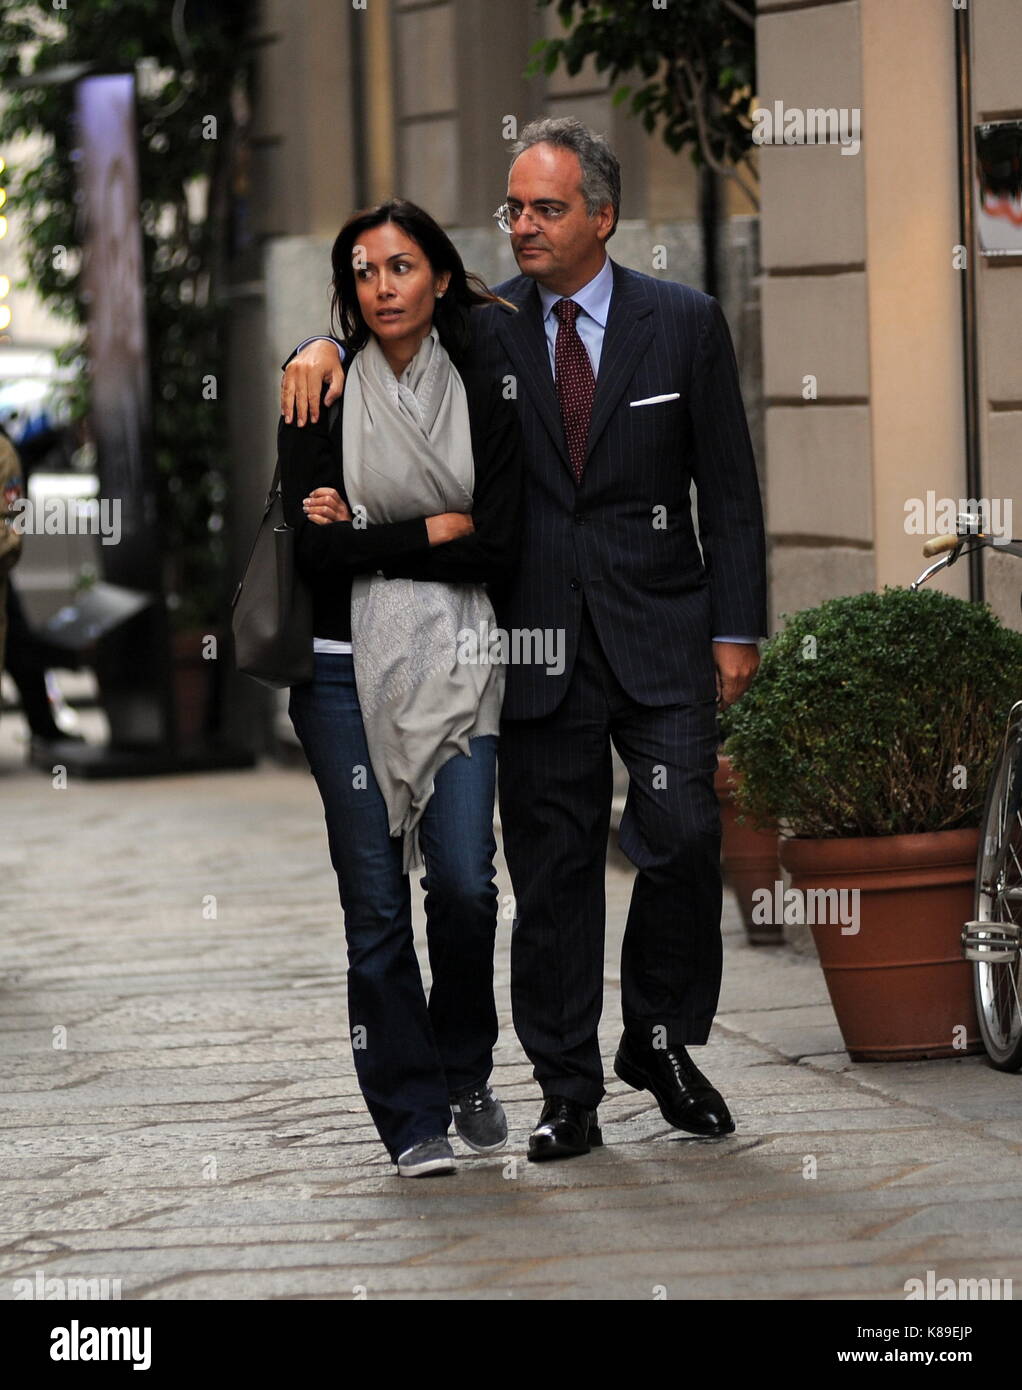 Milan, Mara Carfagna and boyfriend Alessandro Ruben romantic walk Former Minister MARA CARFAGNA surprised walking along the streets of the center together with boyfriend ALESSANDRO RUBEN. Here they are tenderly embraced in Spiga Street in the late afternoon, then MARA CARFAGNA goes to the pharmacy to buy medicines, and finally the two return to the hotel. Stock Photo